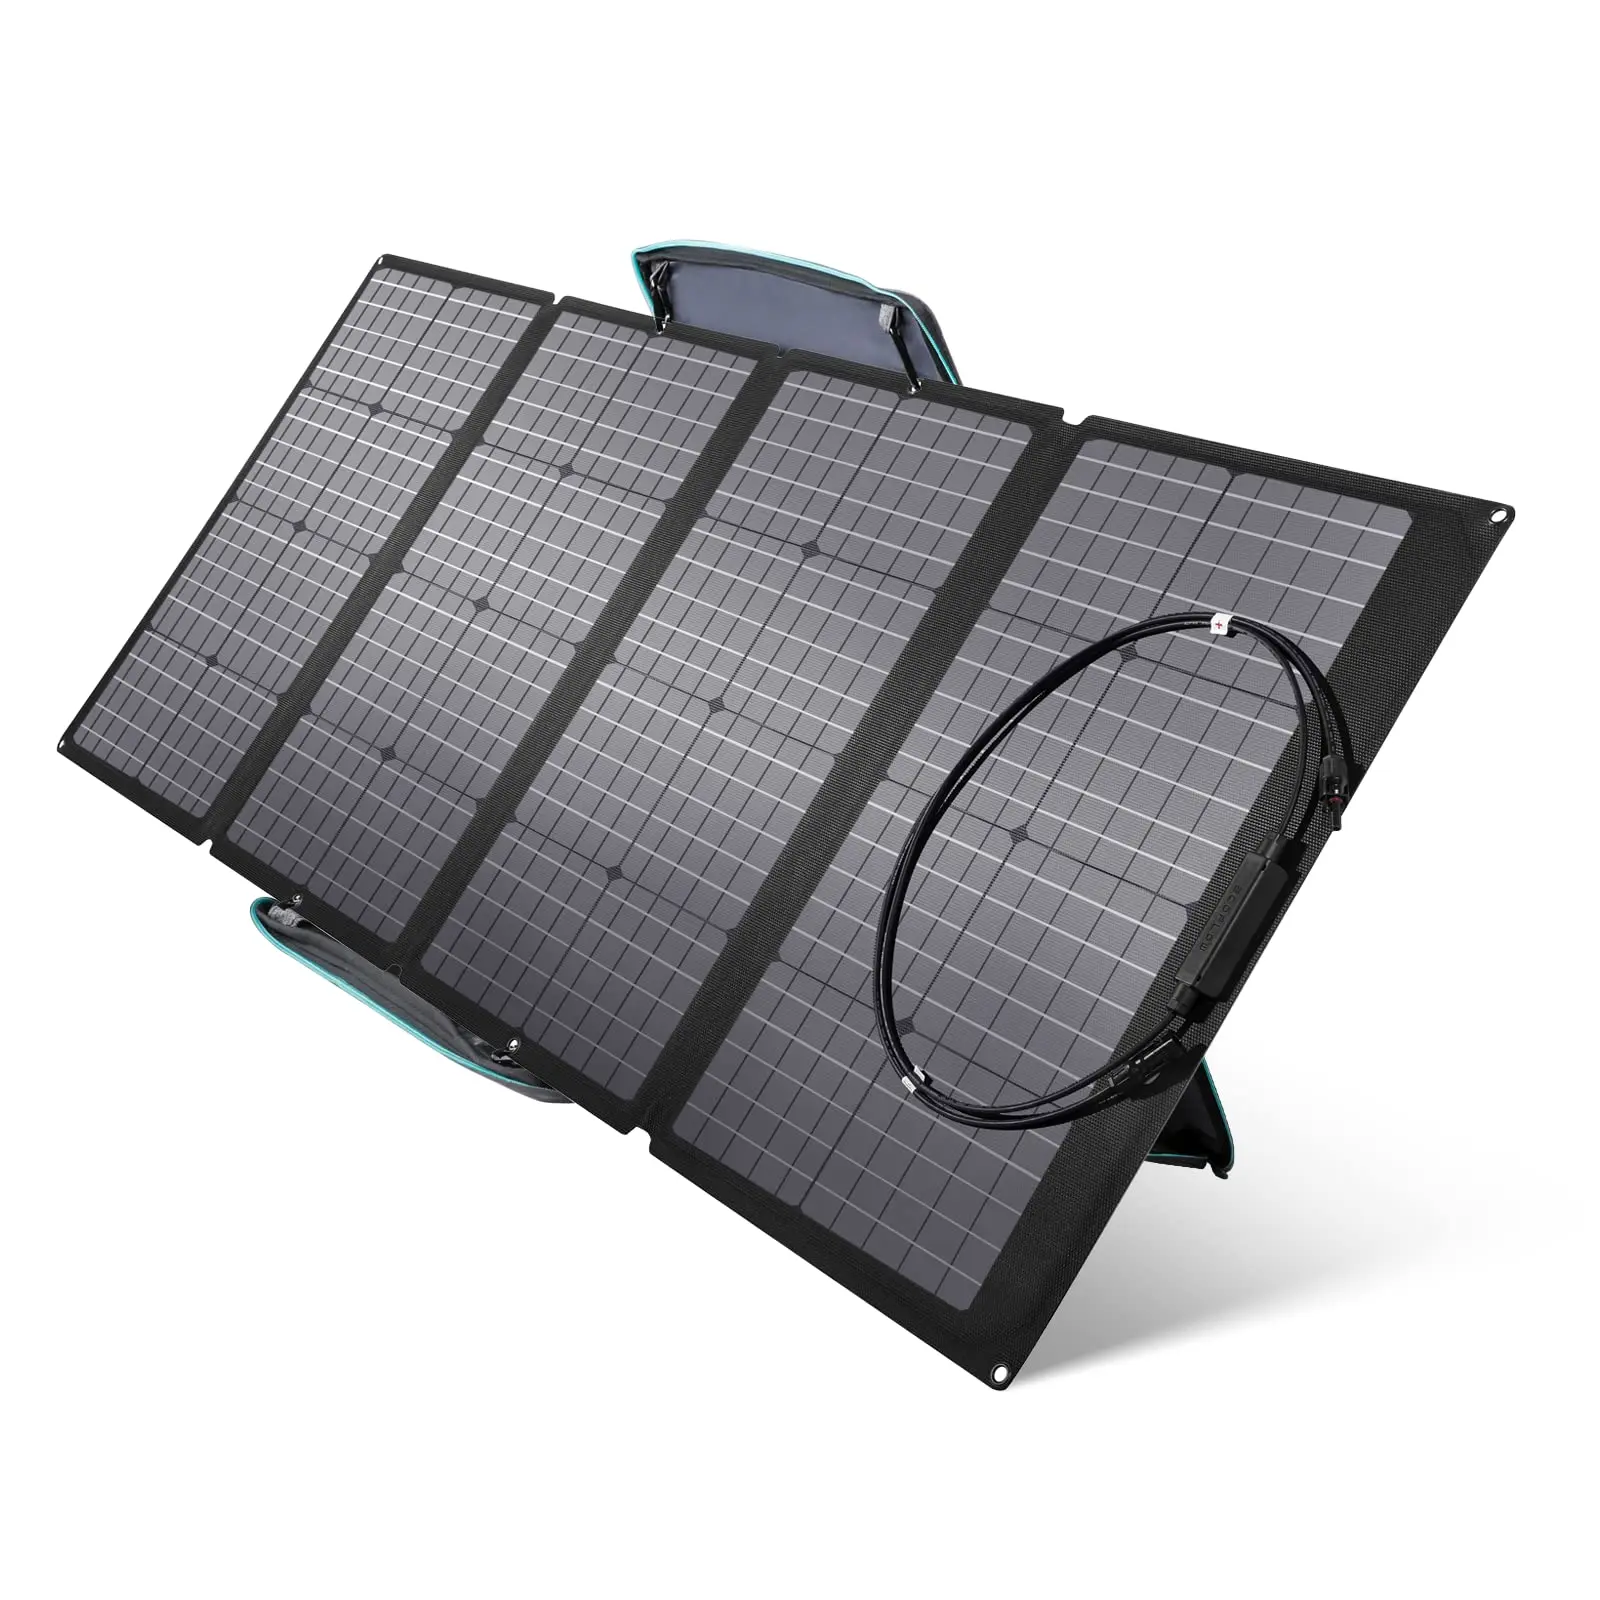 ecoflow with solar panel - How long does it take to charge EcoFlow with solar panel